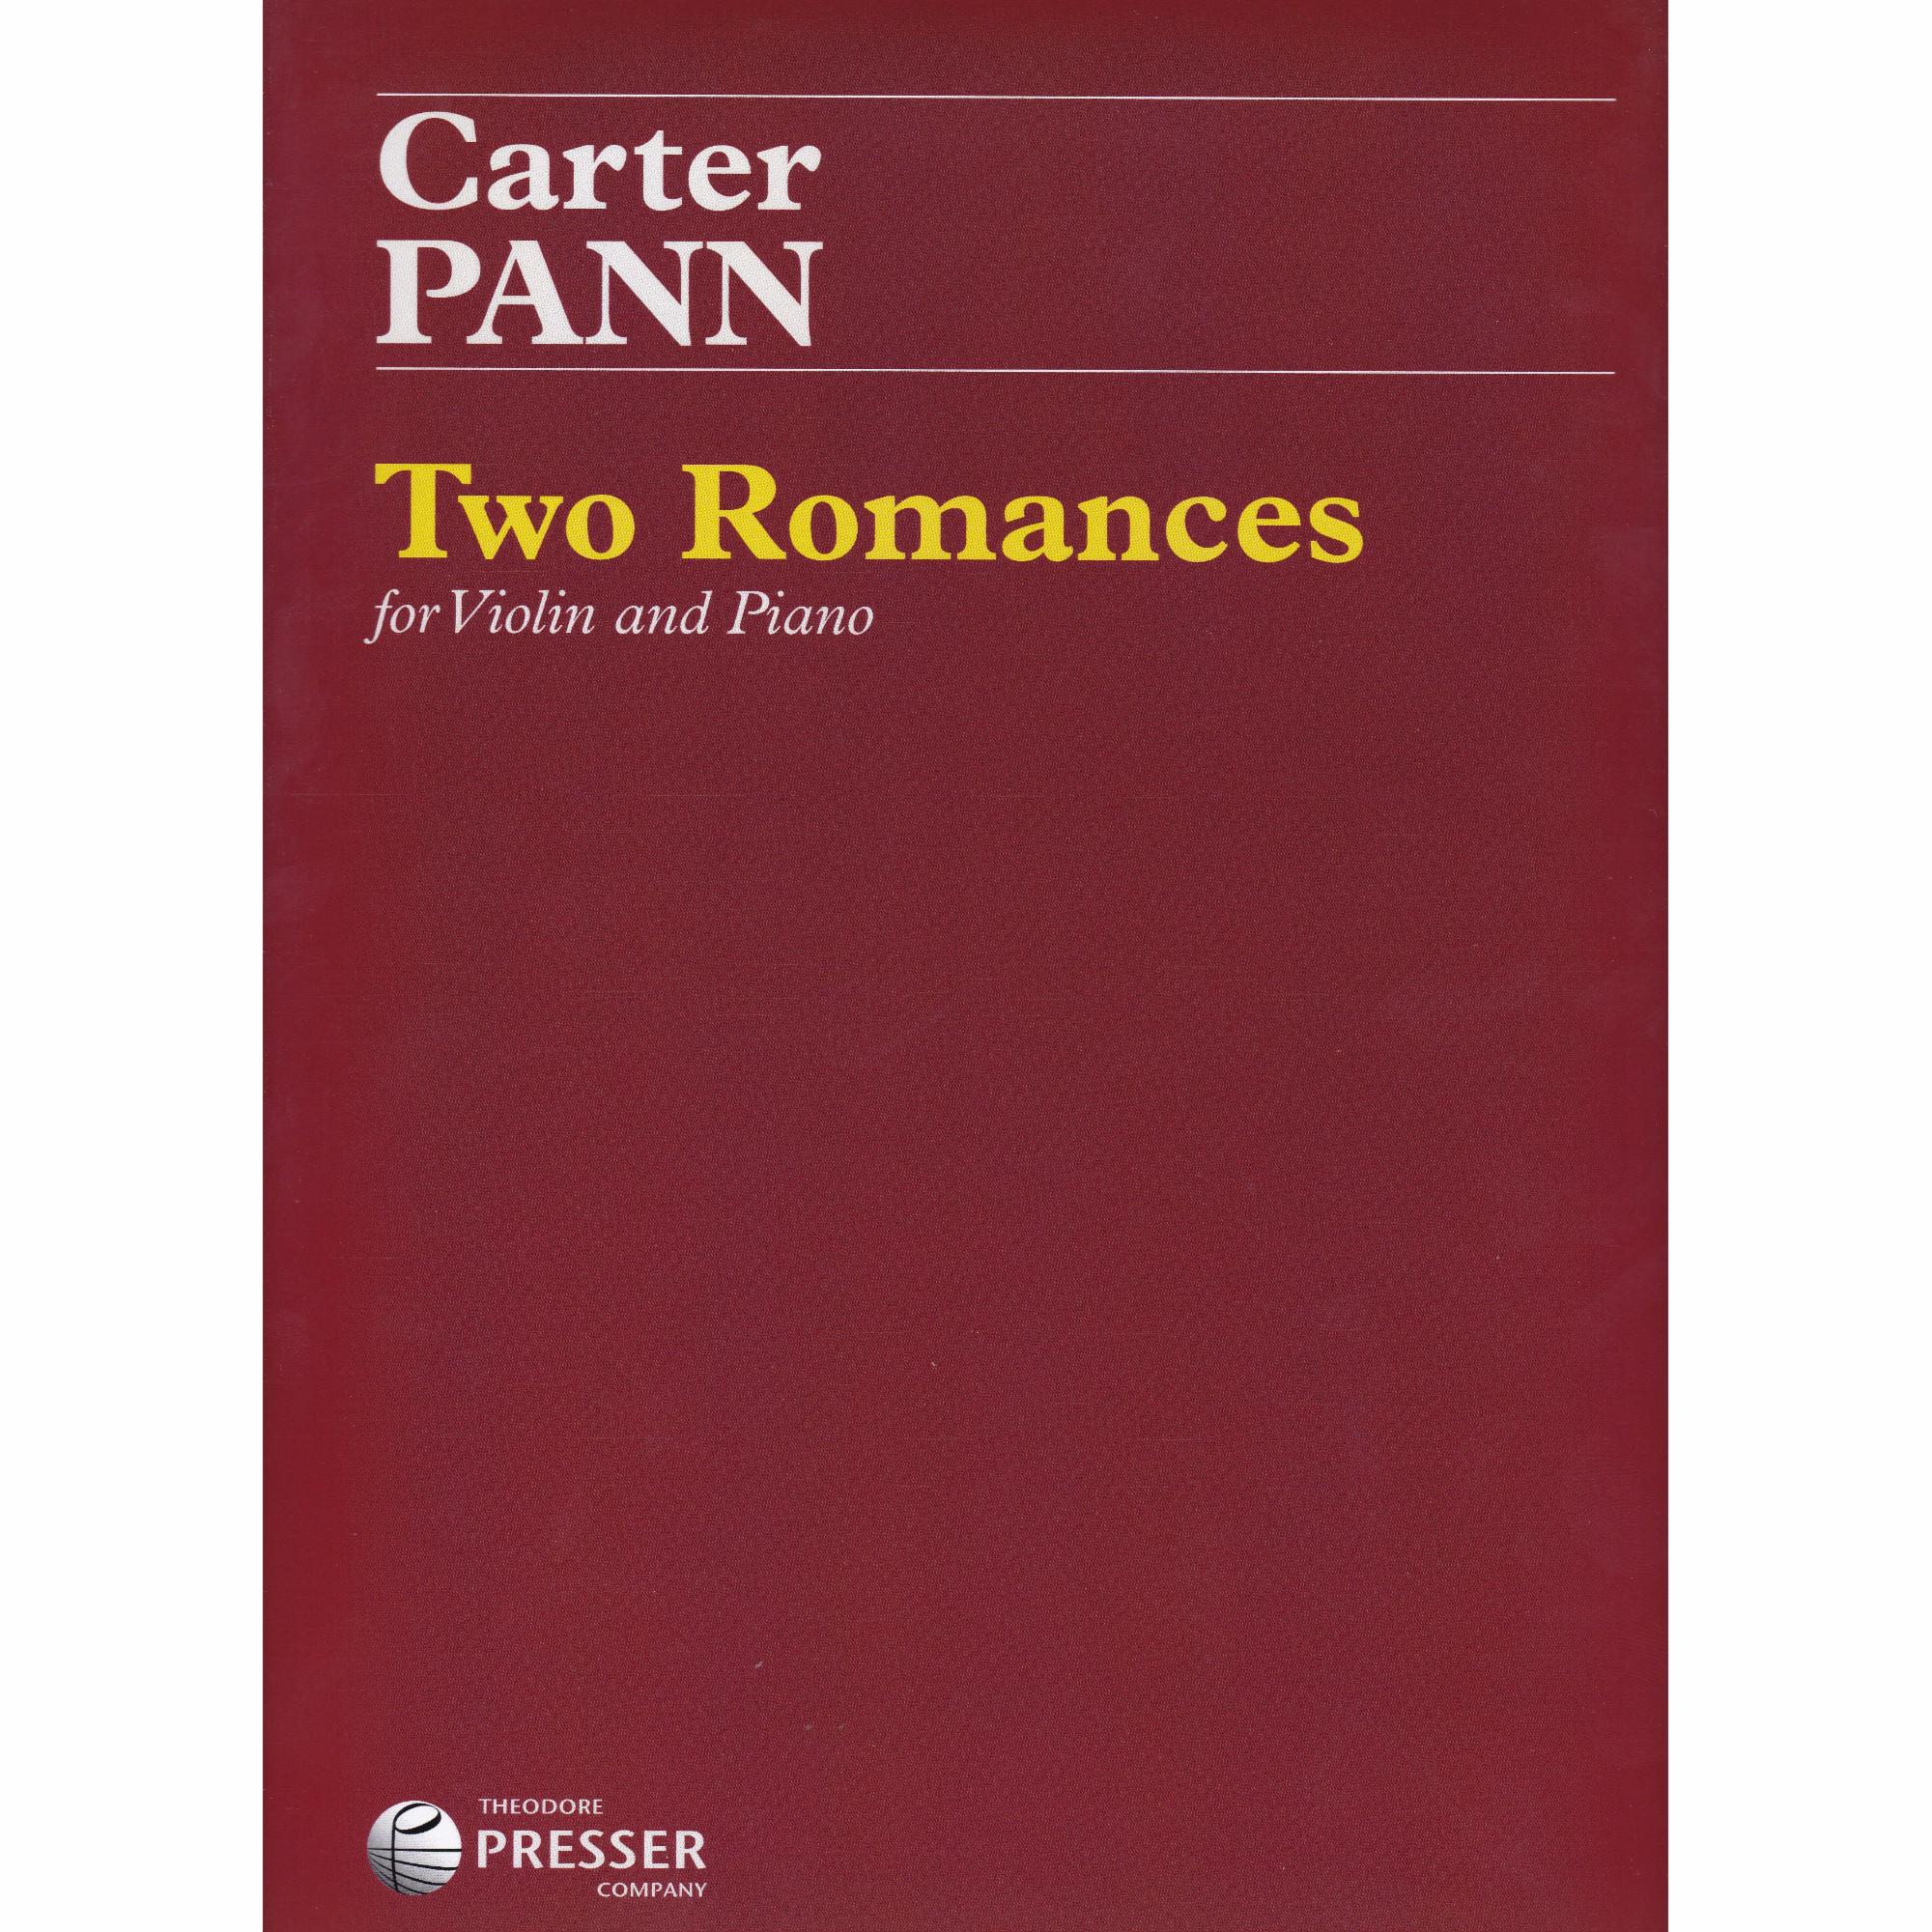 Two Romances for Violin and Piano